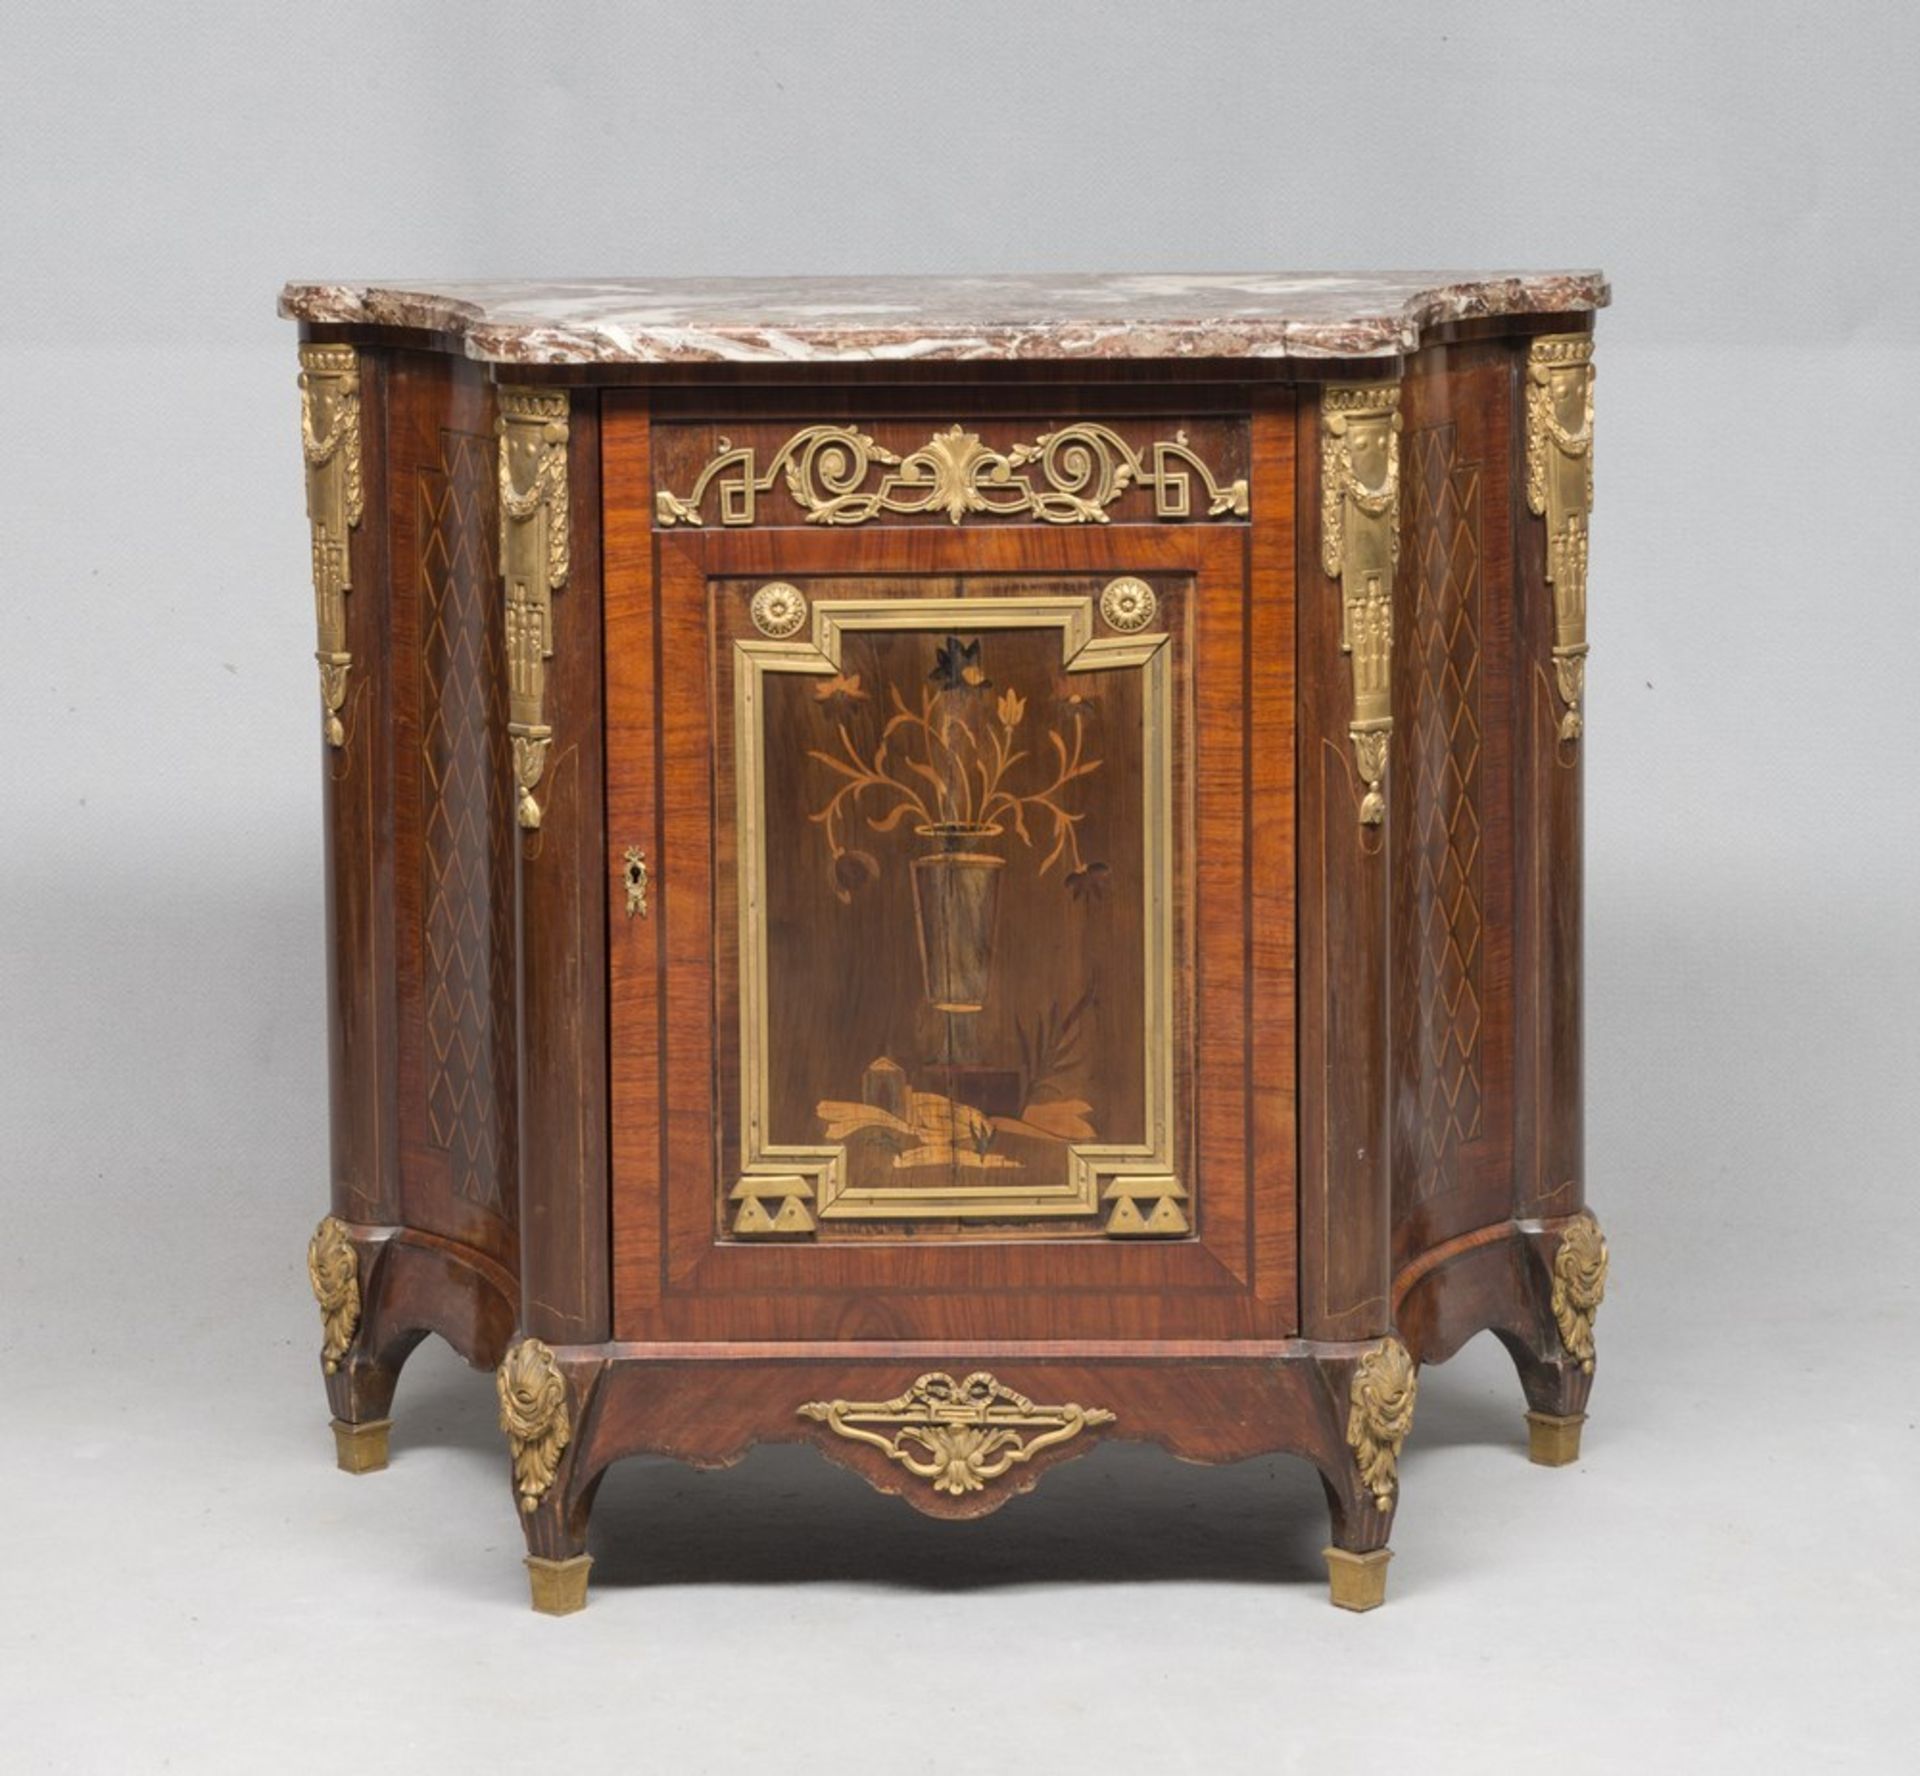 BEAUTIFUL VIOLET WOOD SIDEBOARD, PROBABLY FRANCE, LATE PERIOD LOUIS XVI with threads in rosewood and